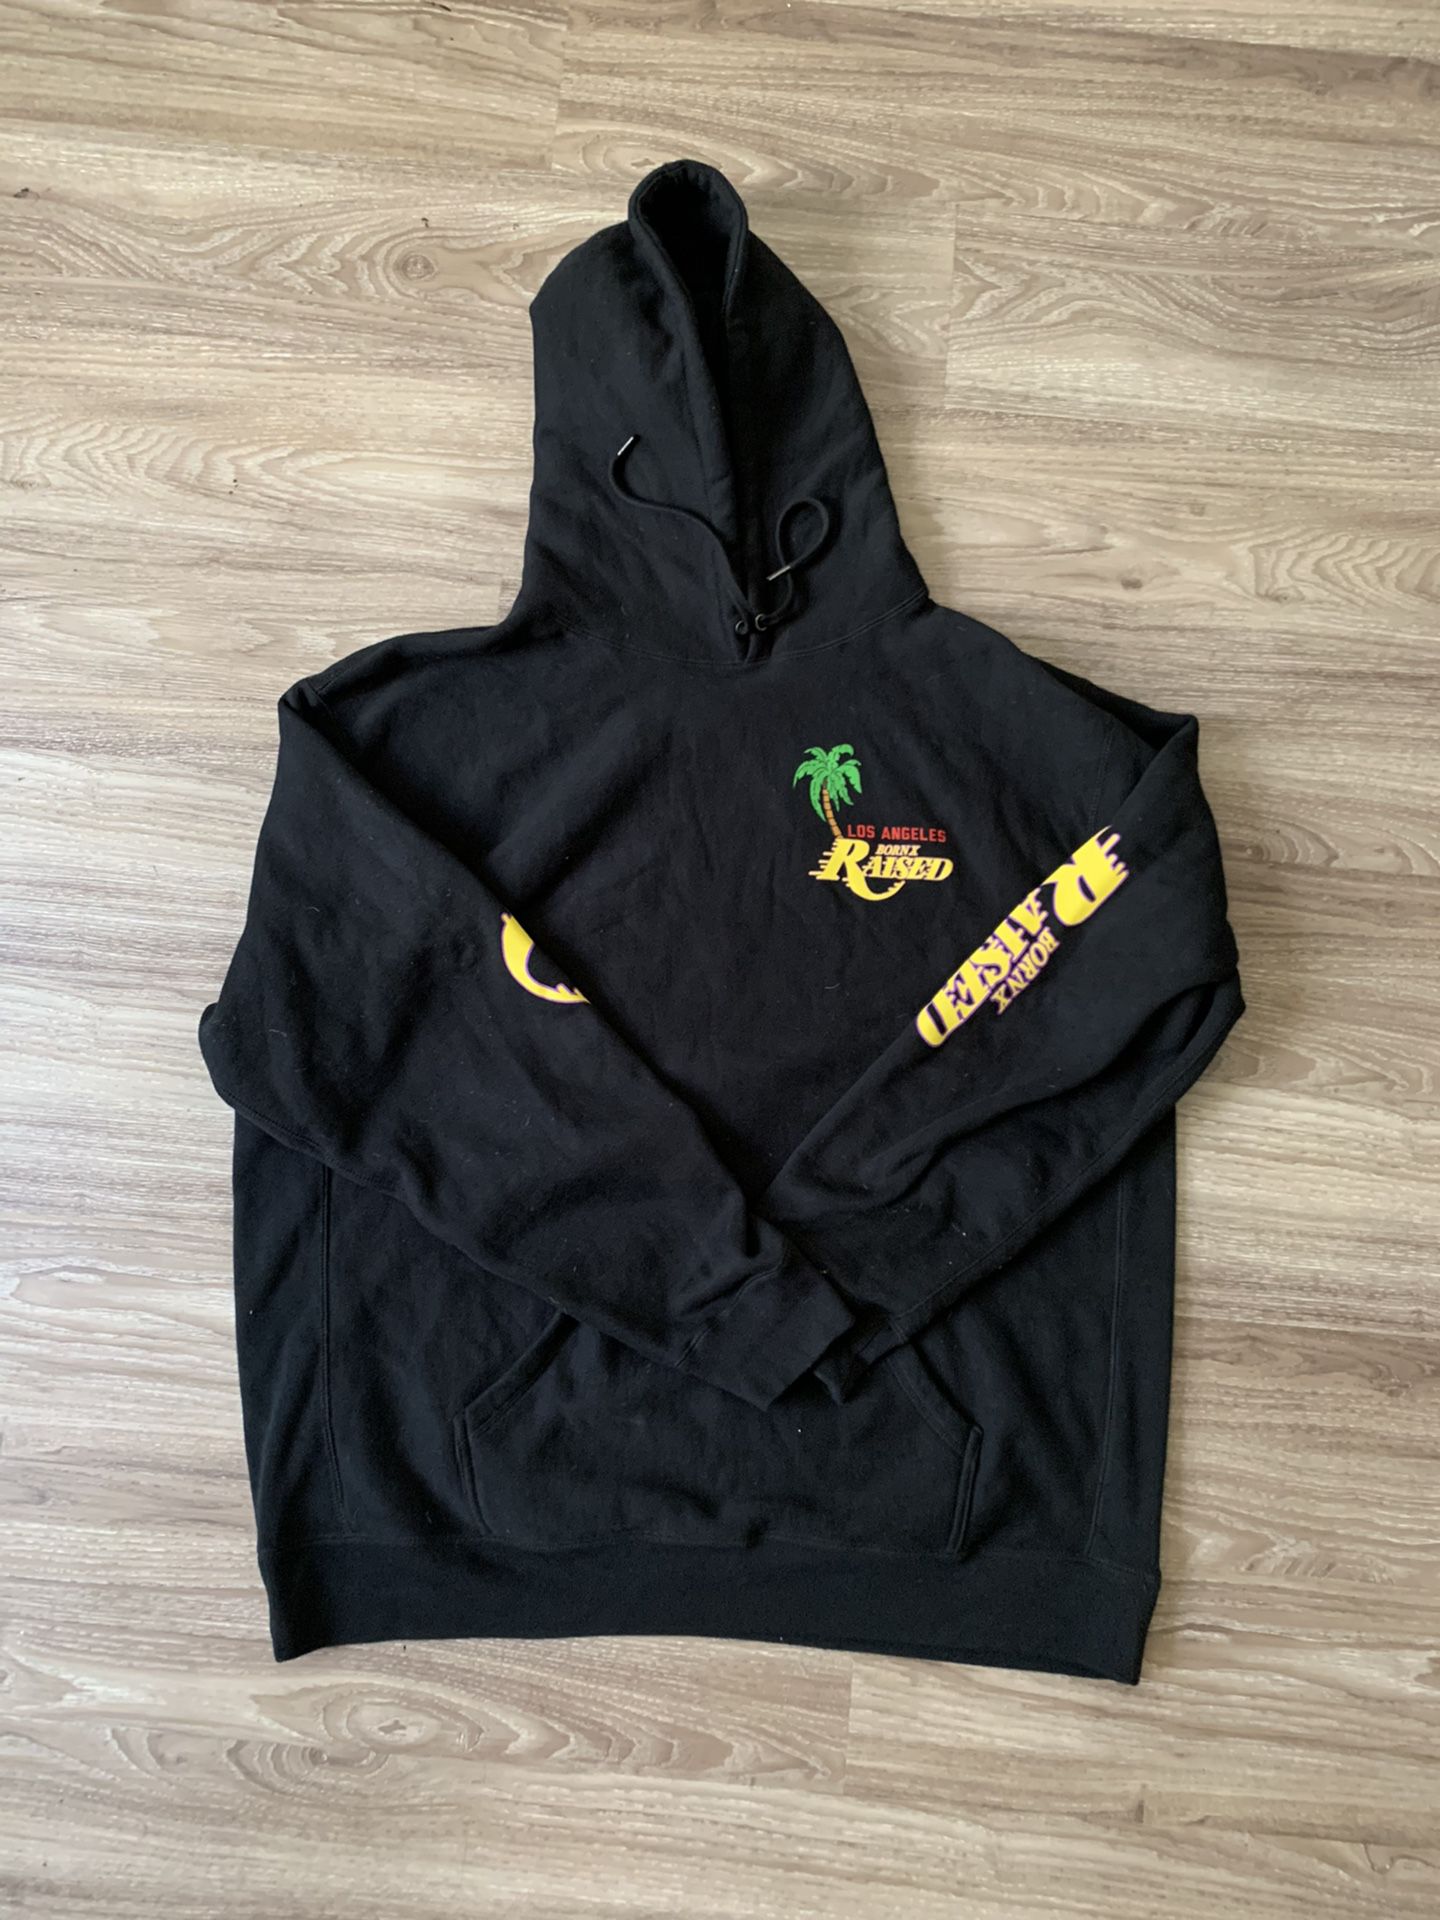 Only 56.00 usd for BORN X RAISED Lakers Hoodie Online at the Shop